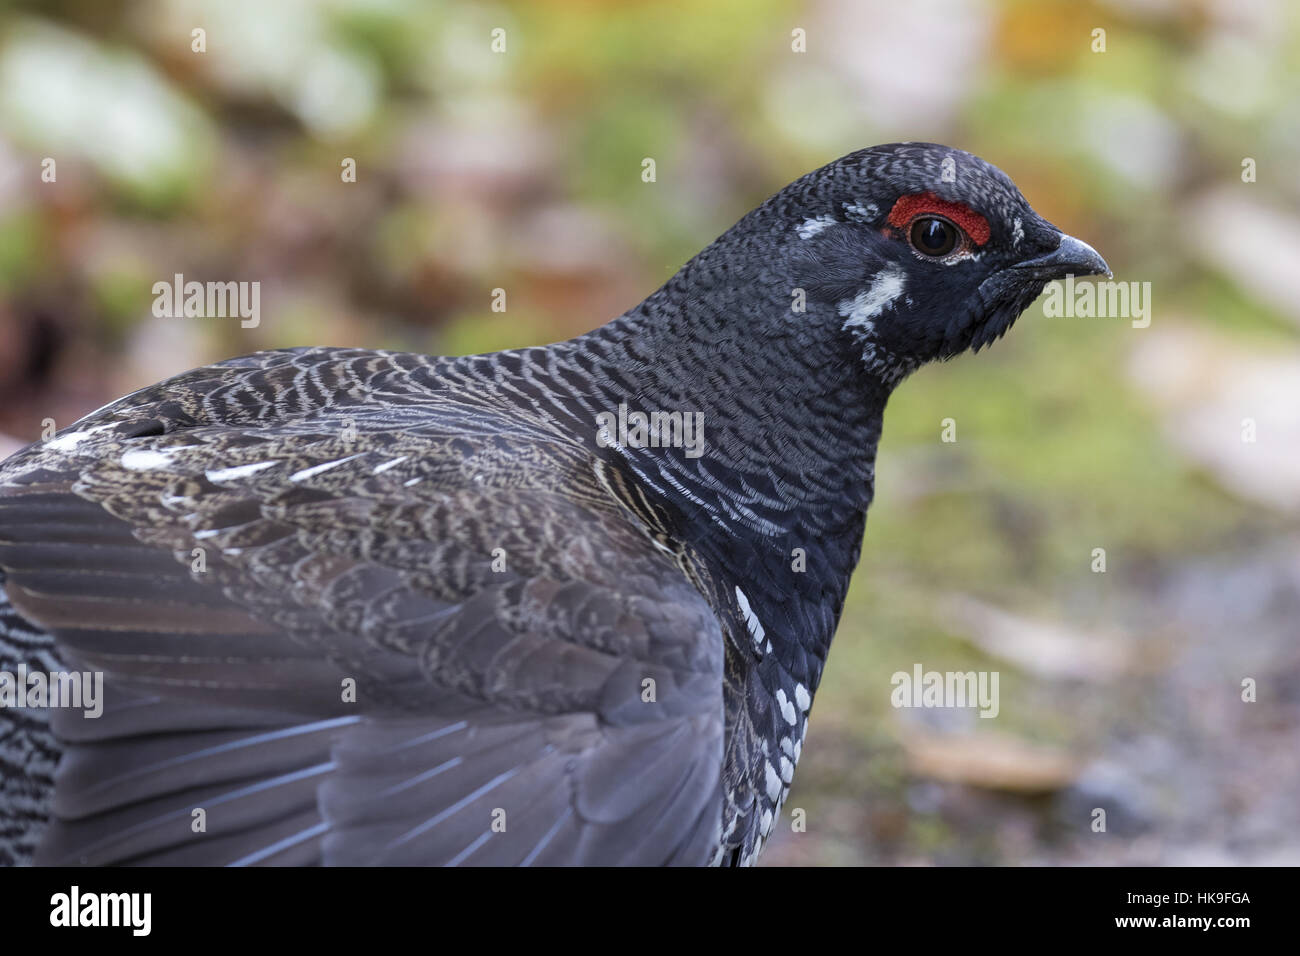 Spruce grouse (Falcipennis canadensis), portrait of an adult male, Jacques-Cartier National Park, province Quebec, Canada, October Stock Photo